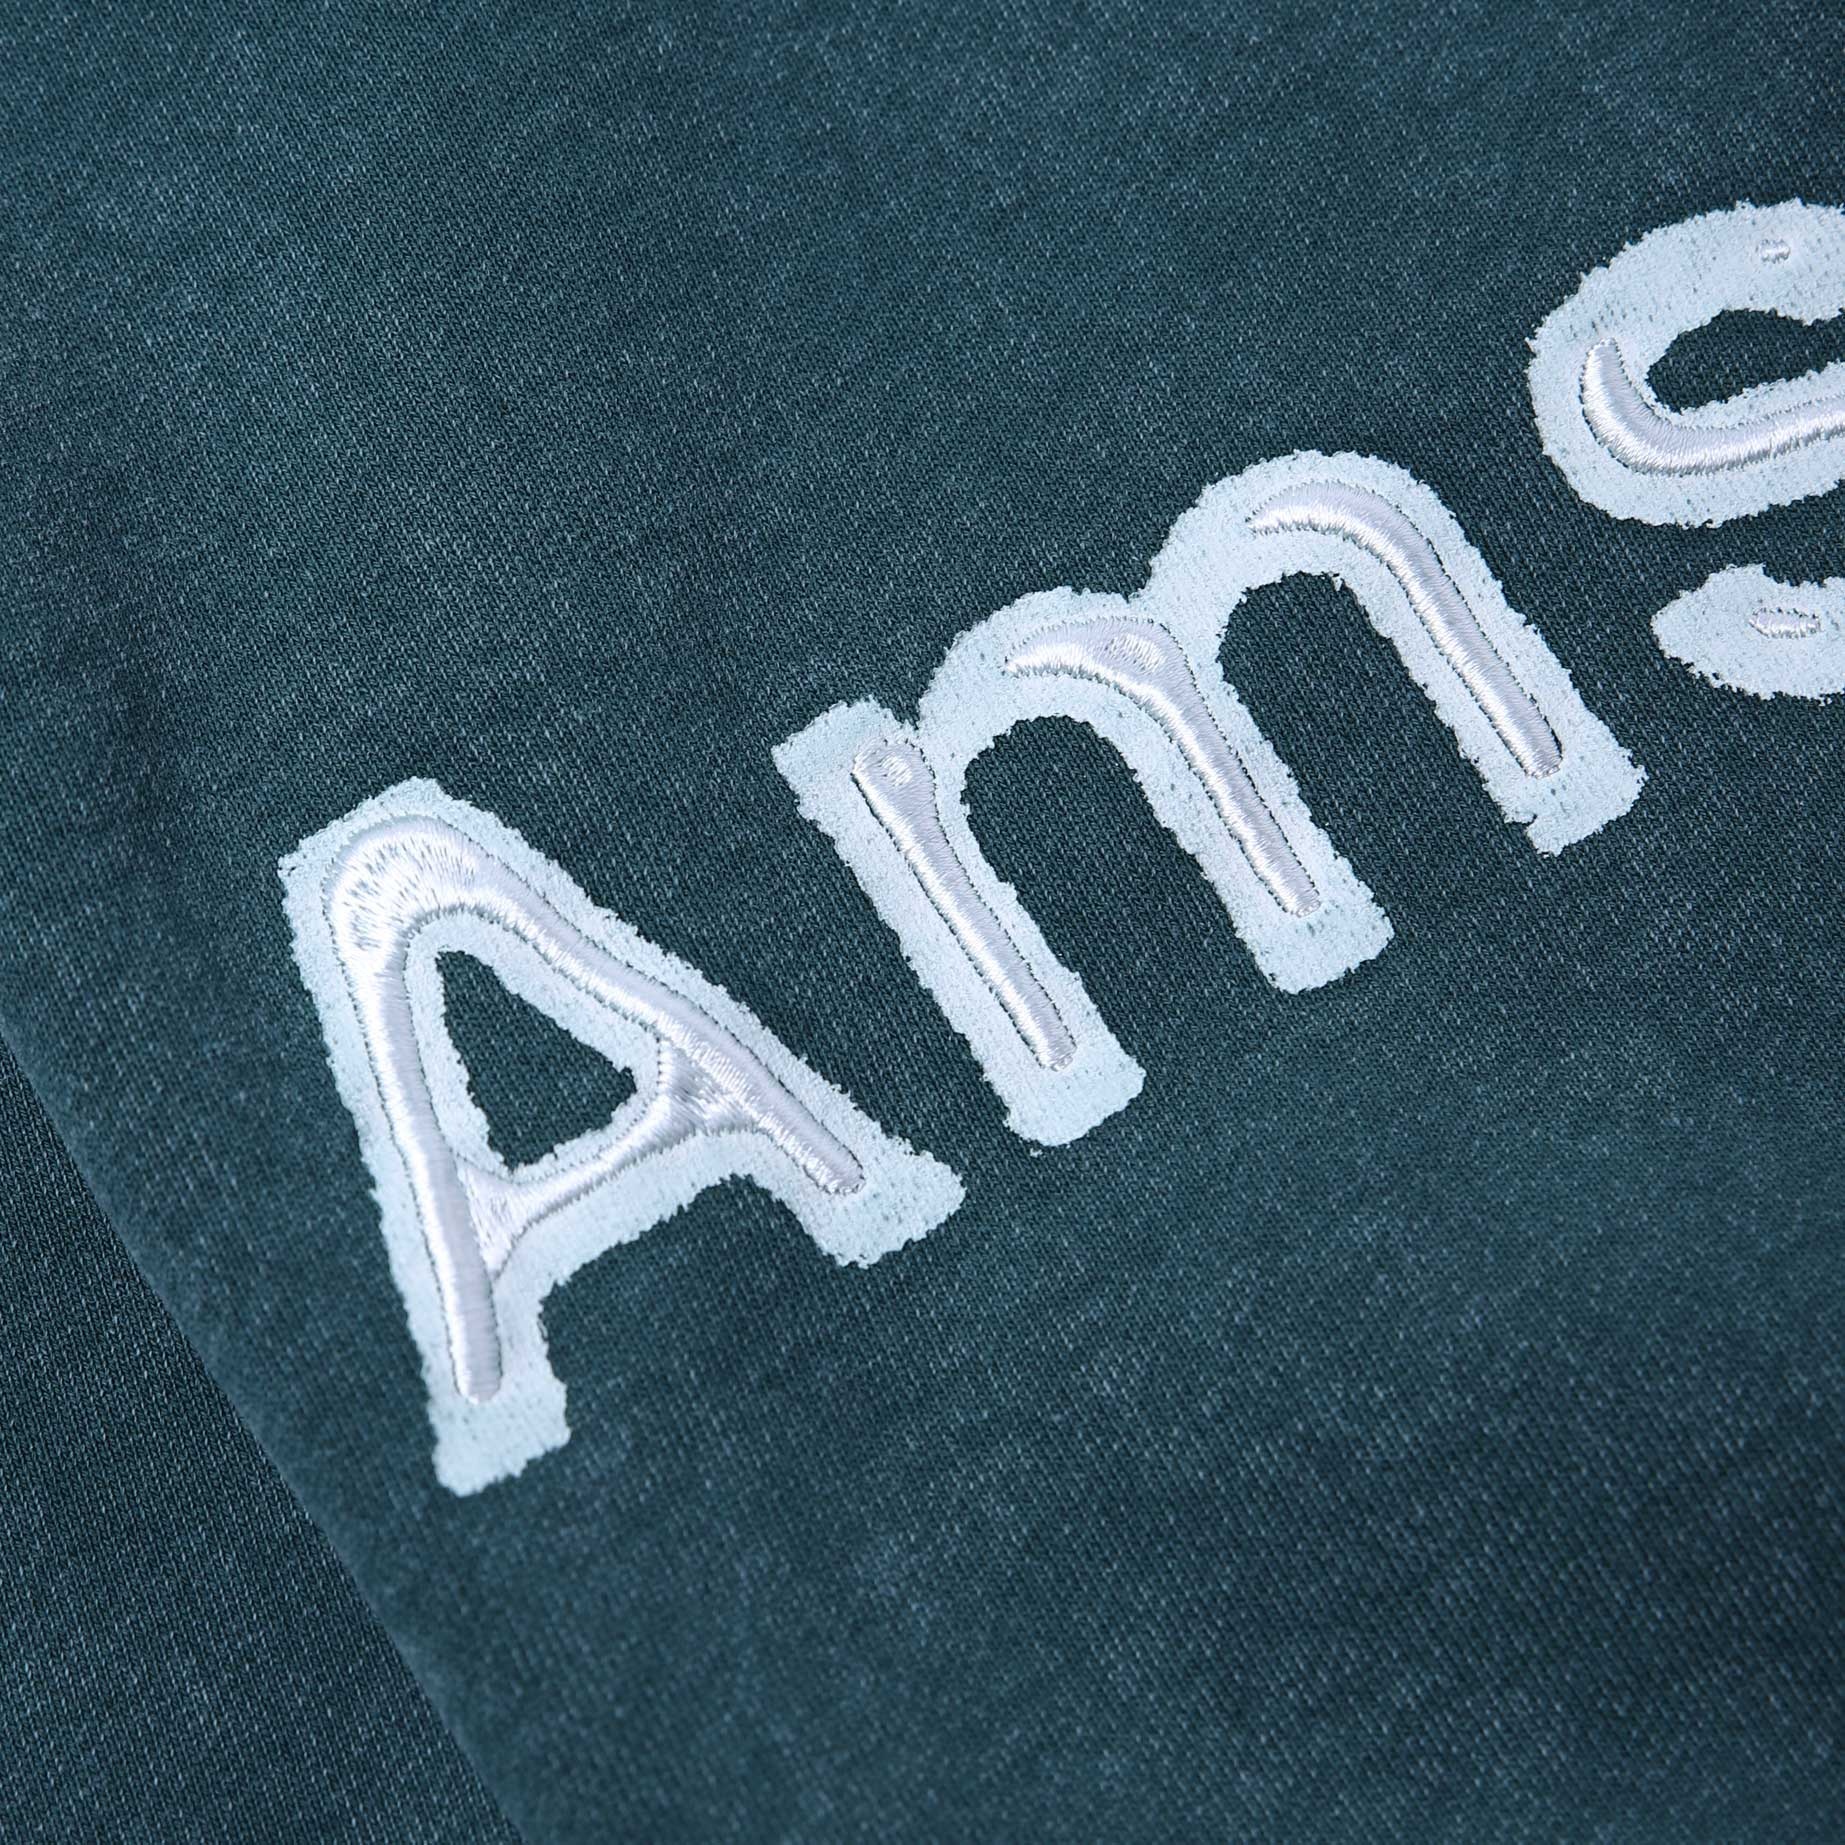 NAME SWEAT 2 WASHED GREEN - New Amsterdam Surf Association